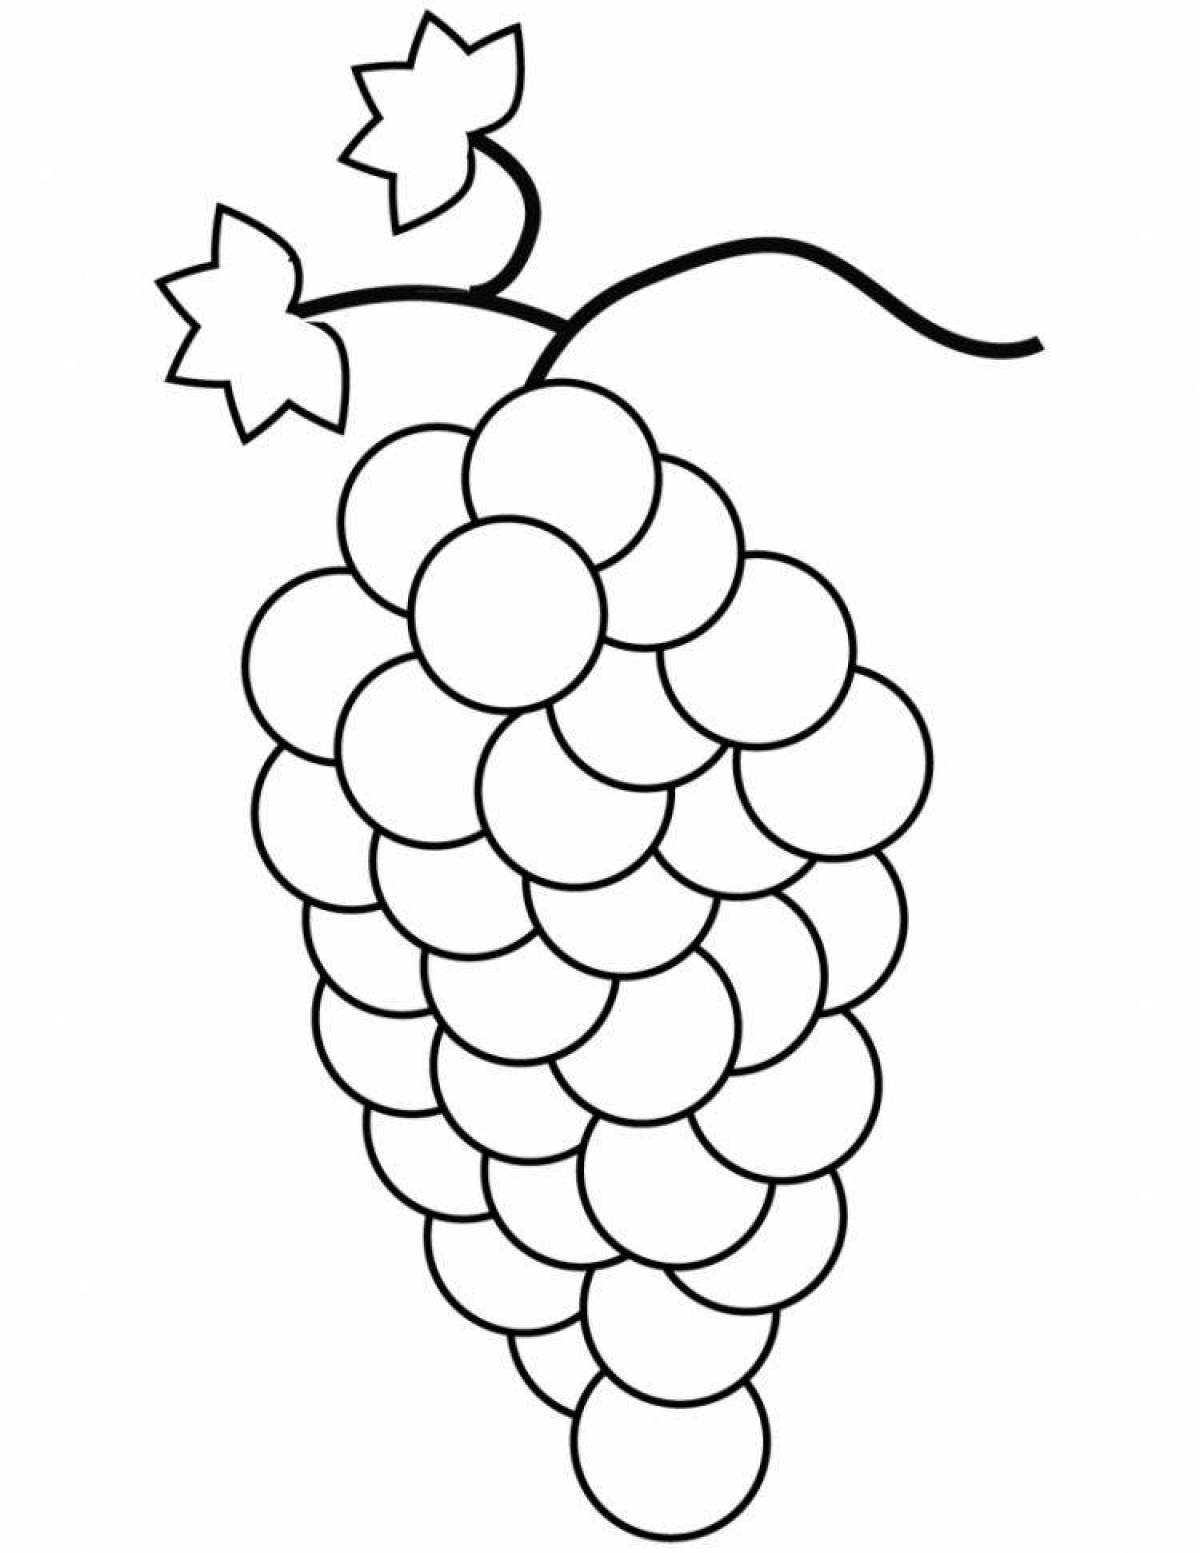 Many grapes coloring book for kids